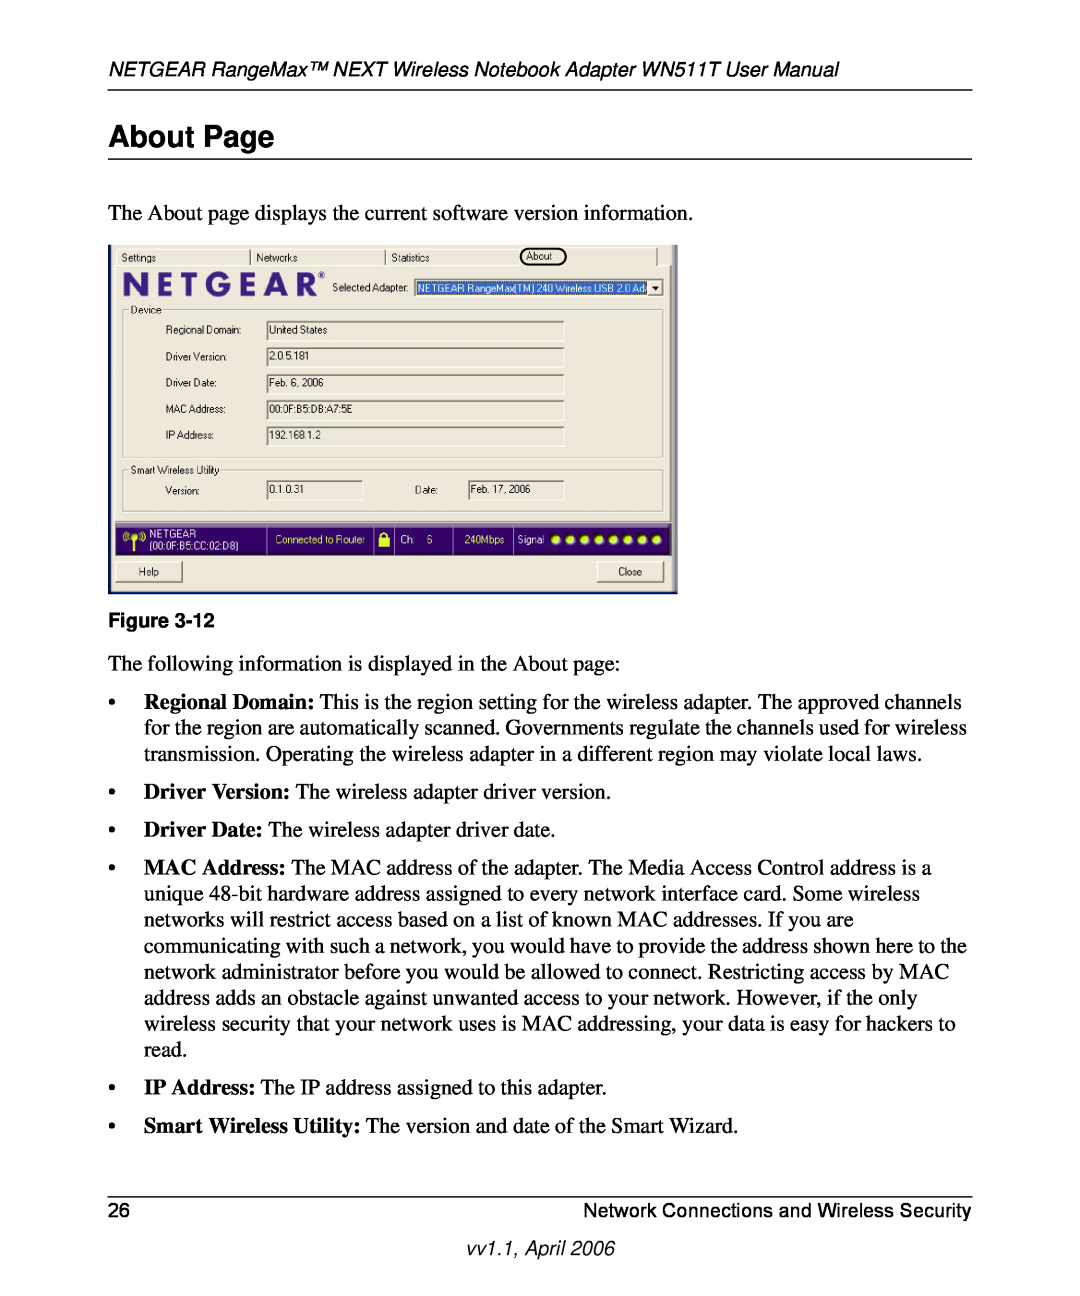 NETGEAR WN511T user manual About Page 